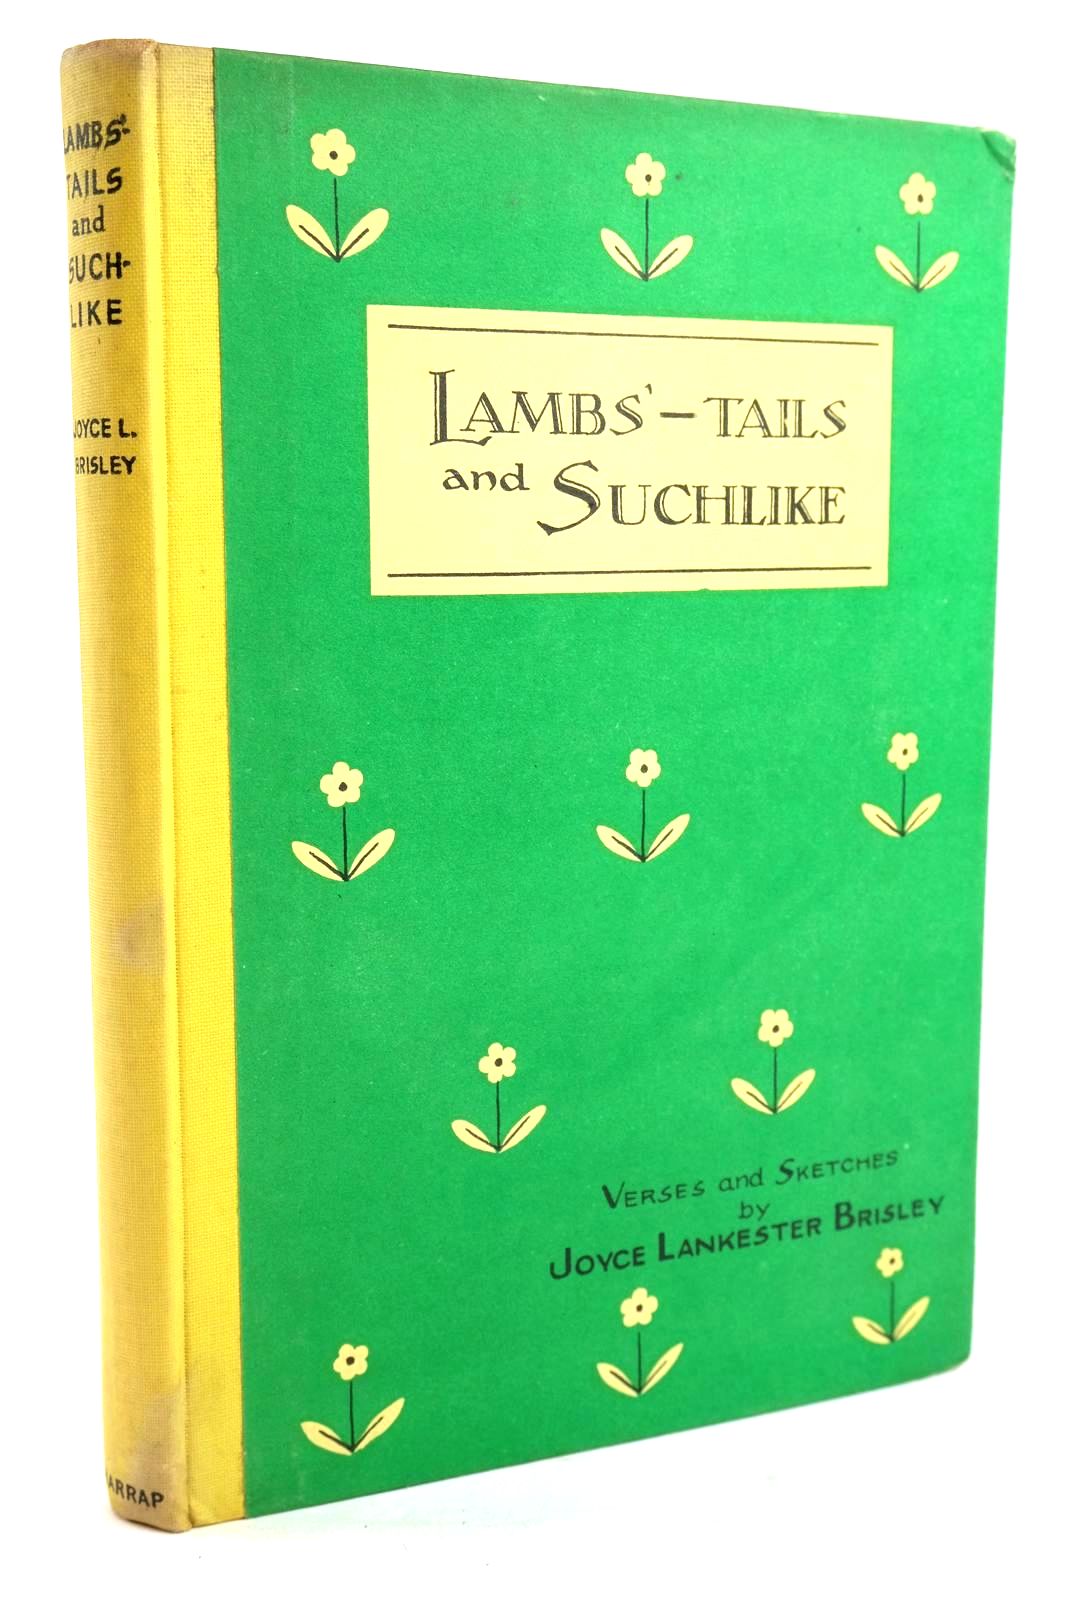 Photo of LAMBS'-TAILS AND SUCHLIKE written by Brisley, Joyce Lankester illustrated by Brisley, Joyce Lankester published by George G. Harrap & Co. Ltd. (STOCK CODE: 1319753)  for sale by Stella & Rose's Books